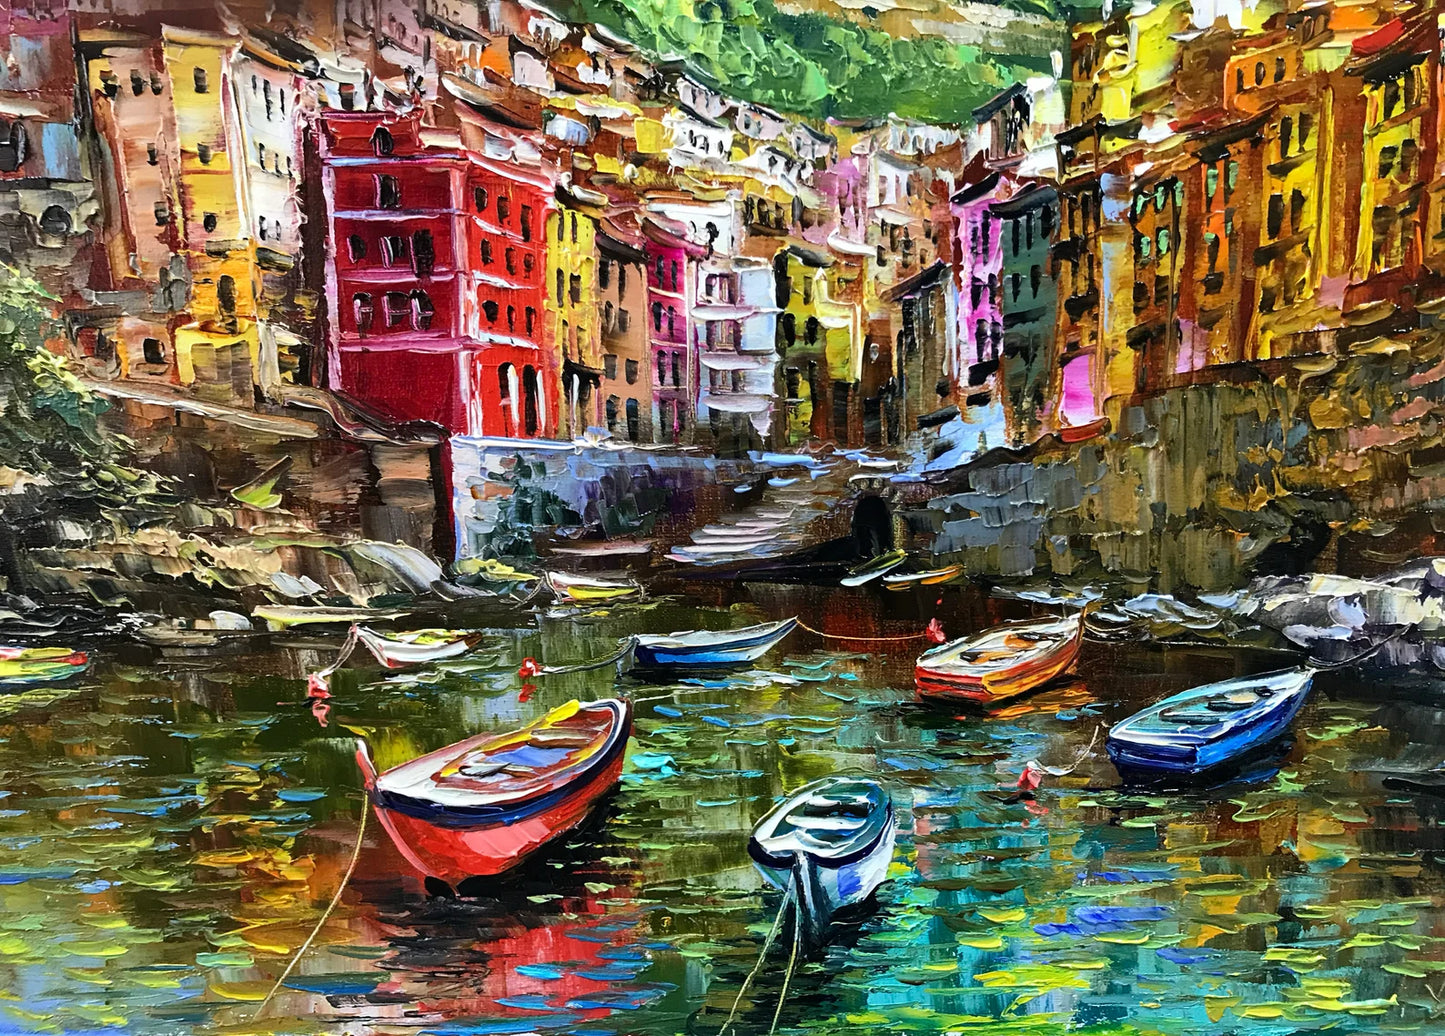 Cinque Terre Italy Oil Painting Original Italy Colorful Houses on Cliff Wall Art Riomaggiore Painting Cinque Terre Artwork